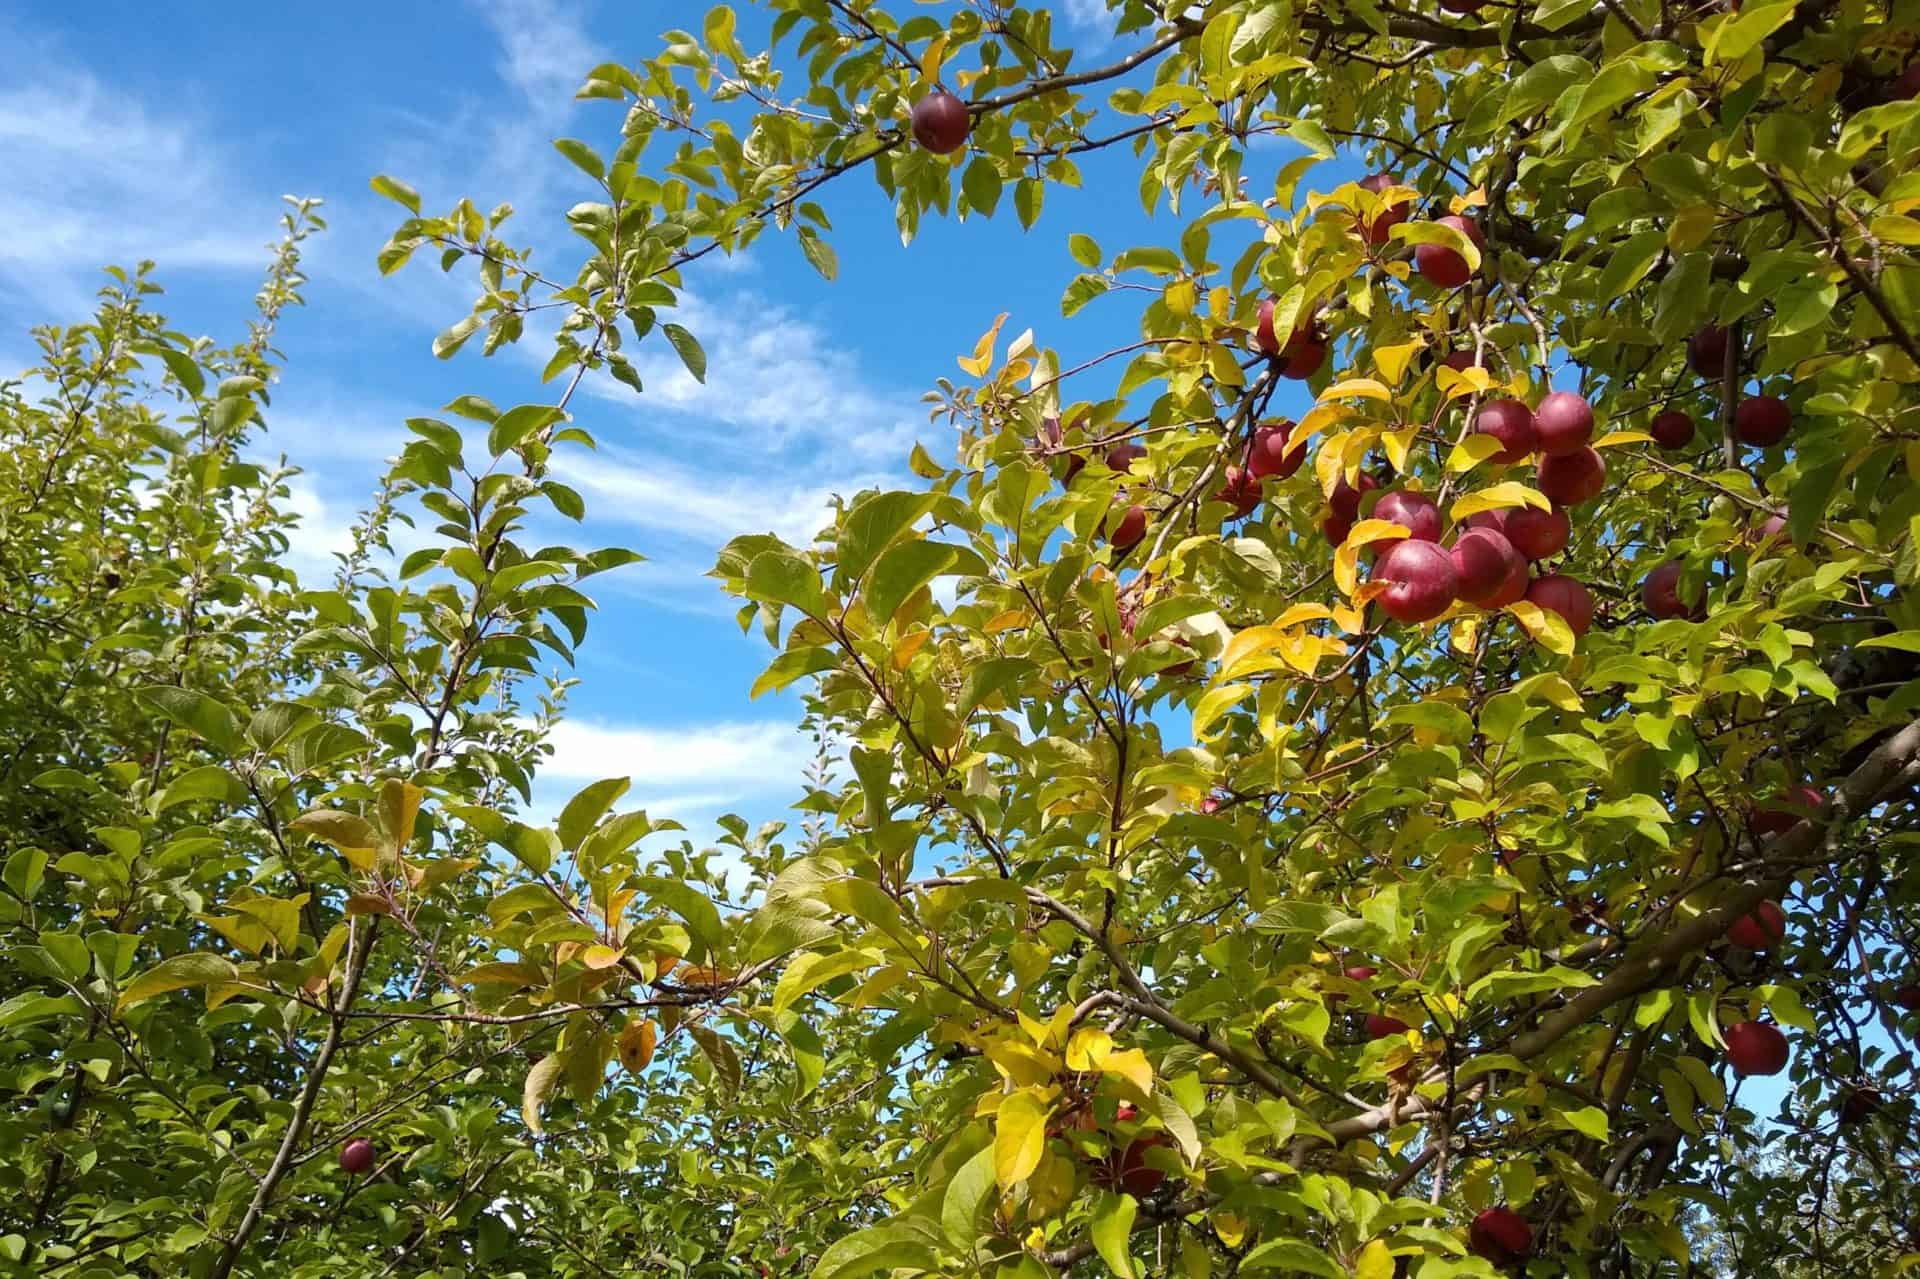 Happy Valley Orchard - Apples in a Tree